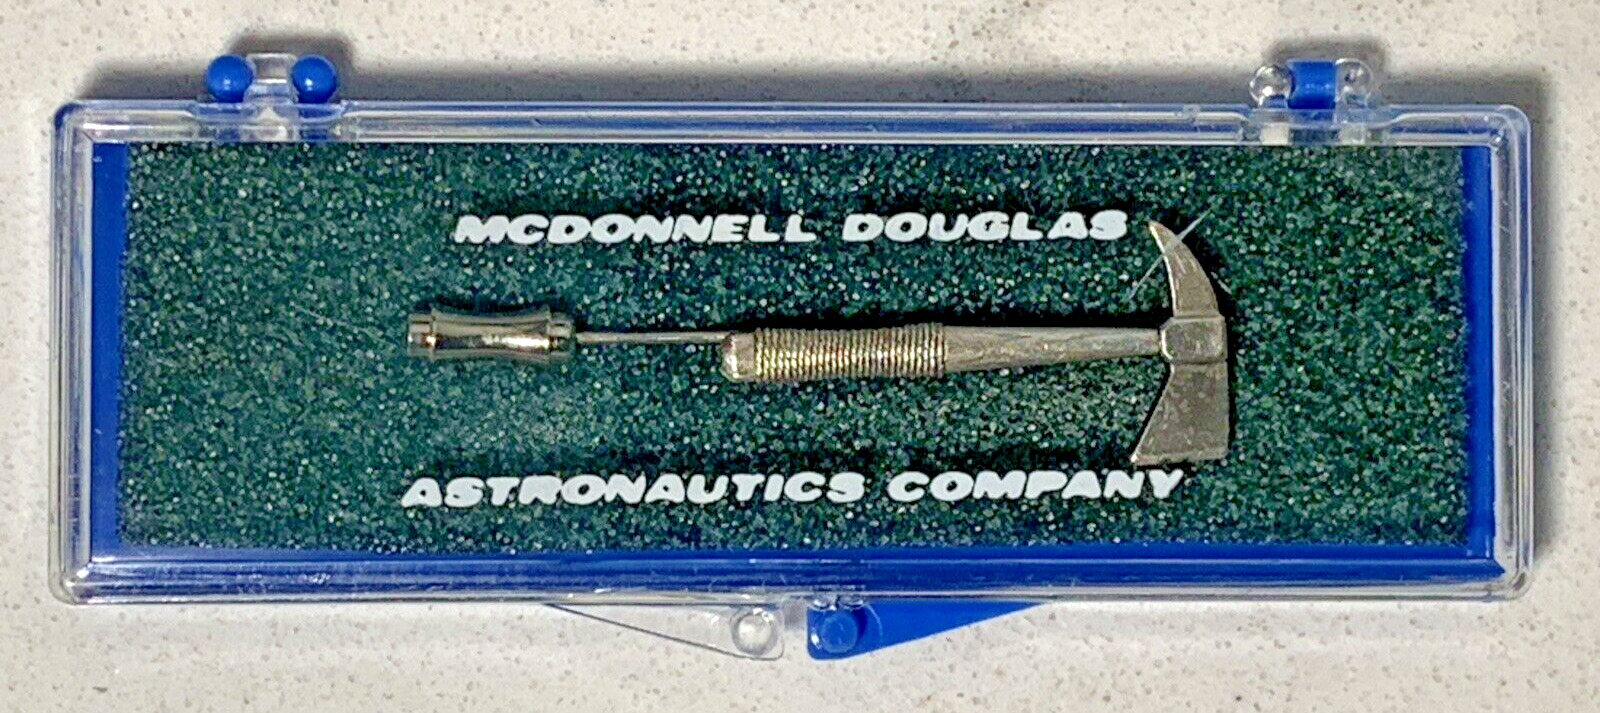 Vintage McDonnell Douglas USN Tomahawk Cruise Missile Lapel Tie Pin New in Case